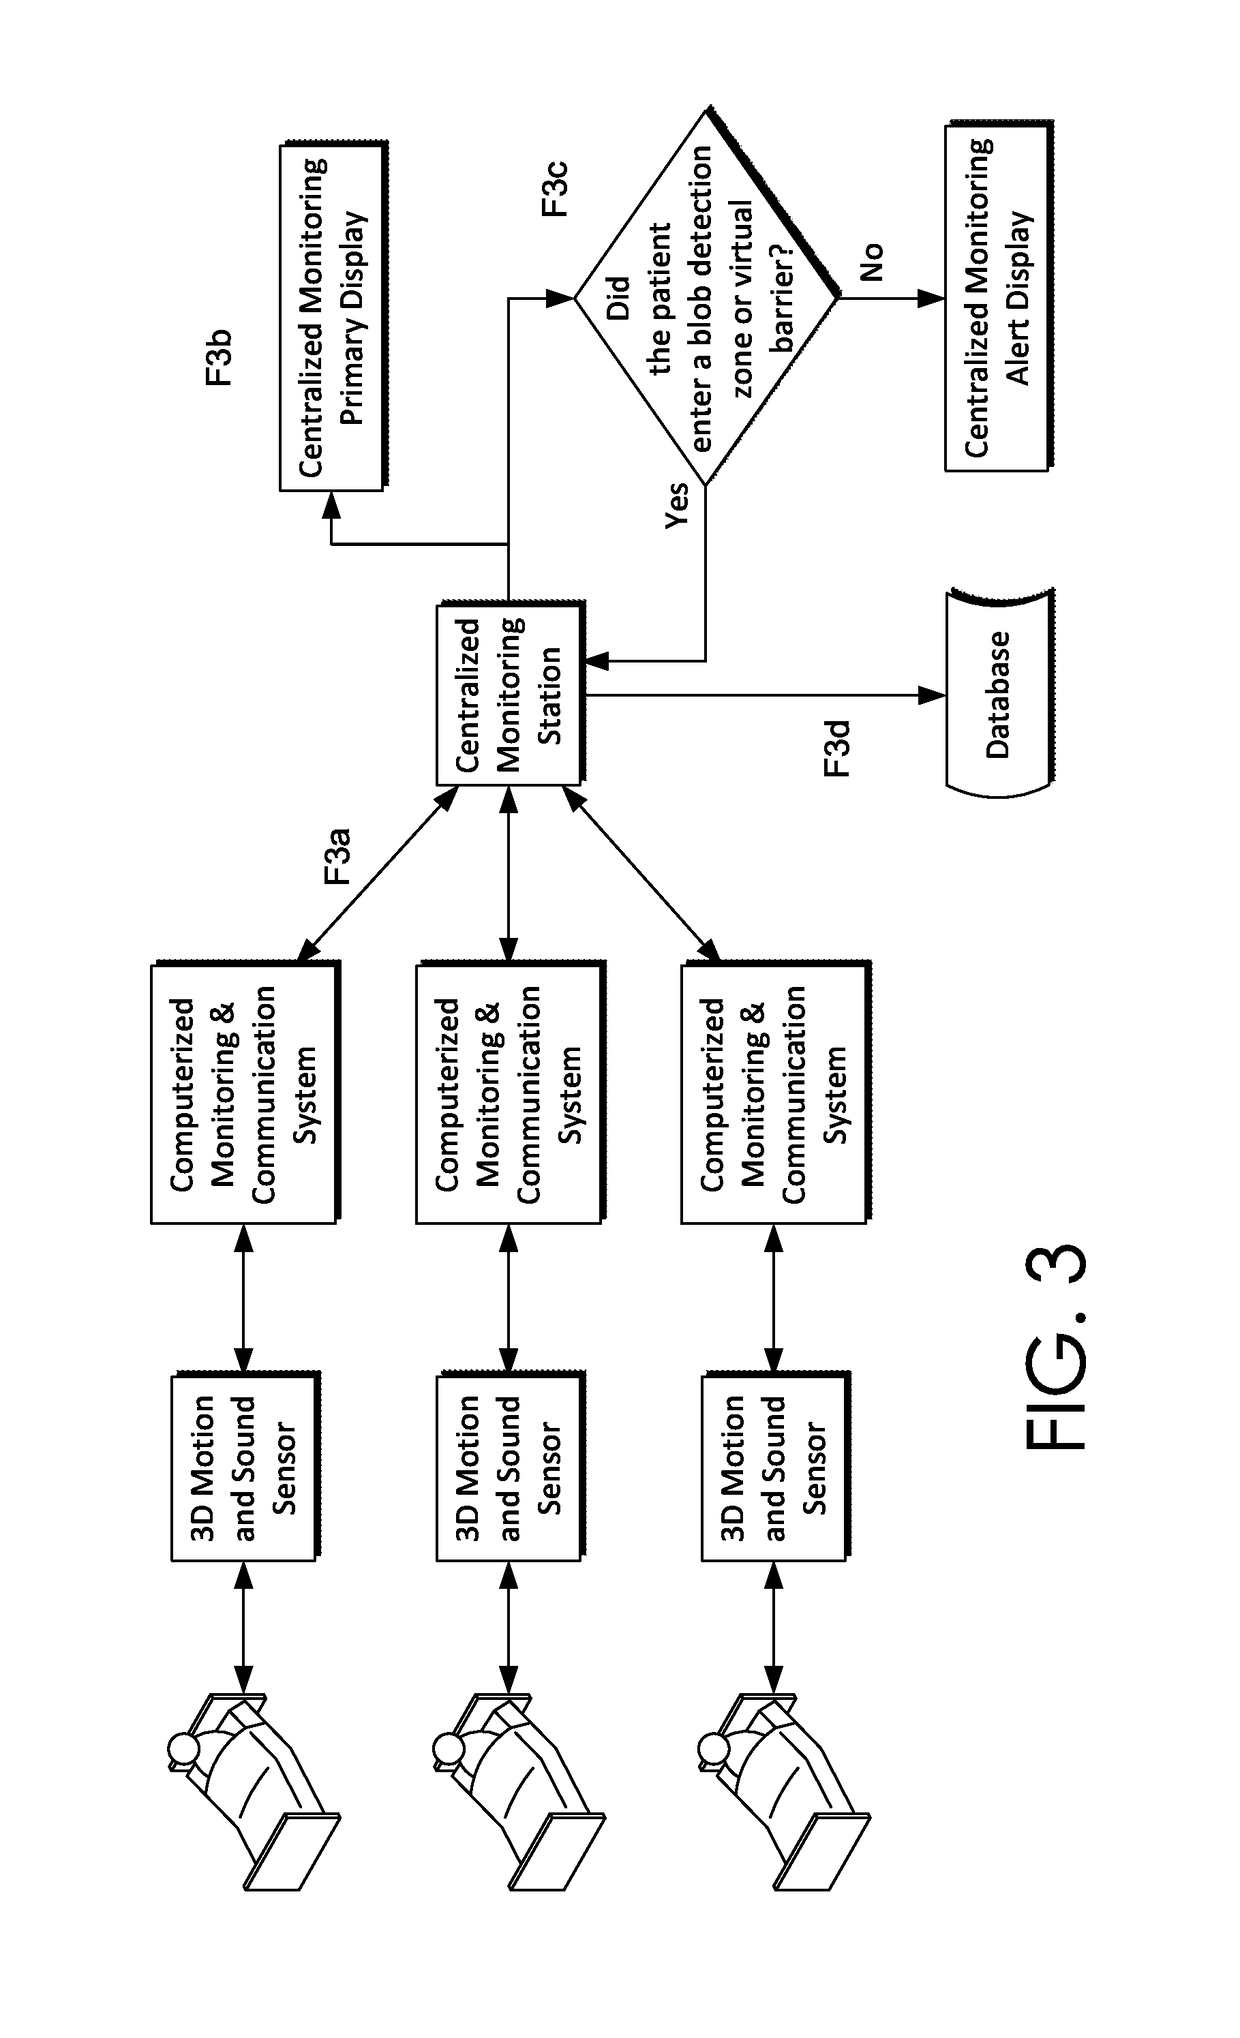 Method for determining whether an individual enters a prescribed virtual zone using skeletal tracking and 3D blob detection